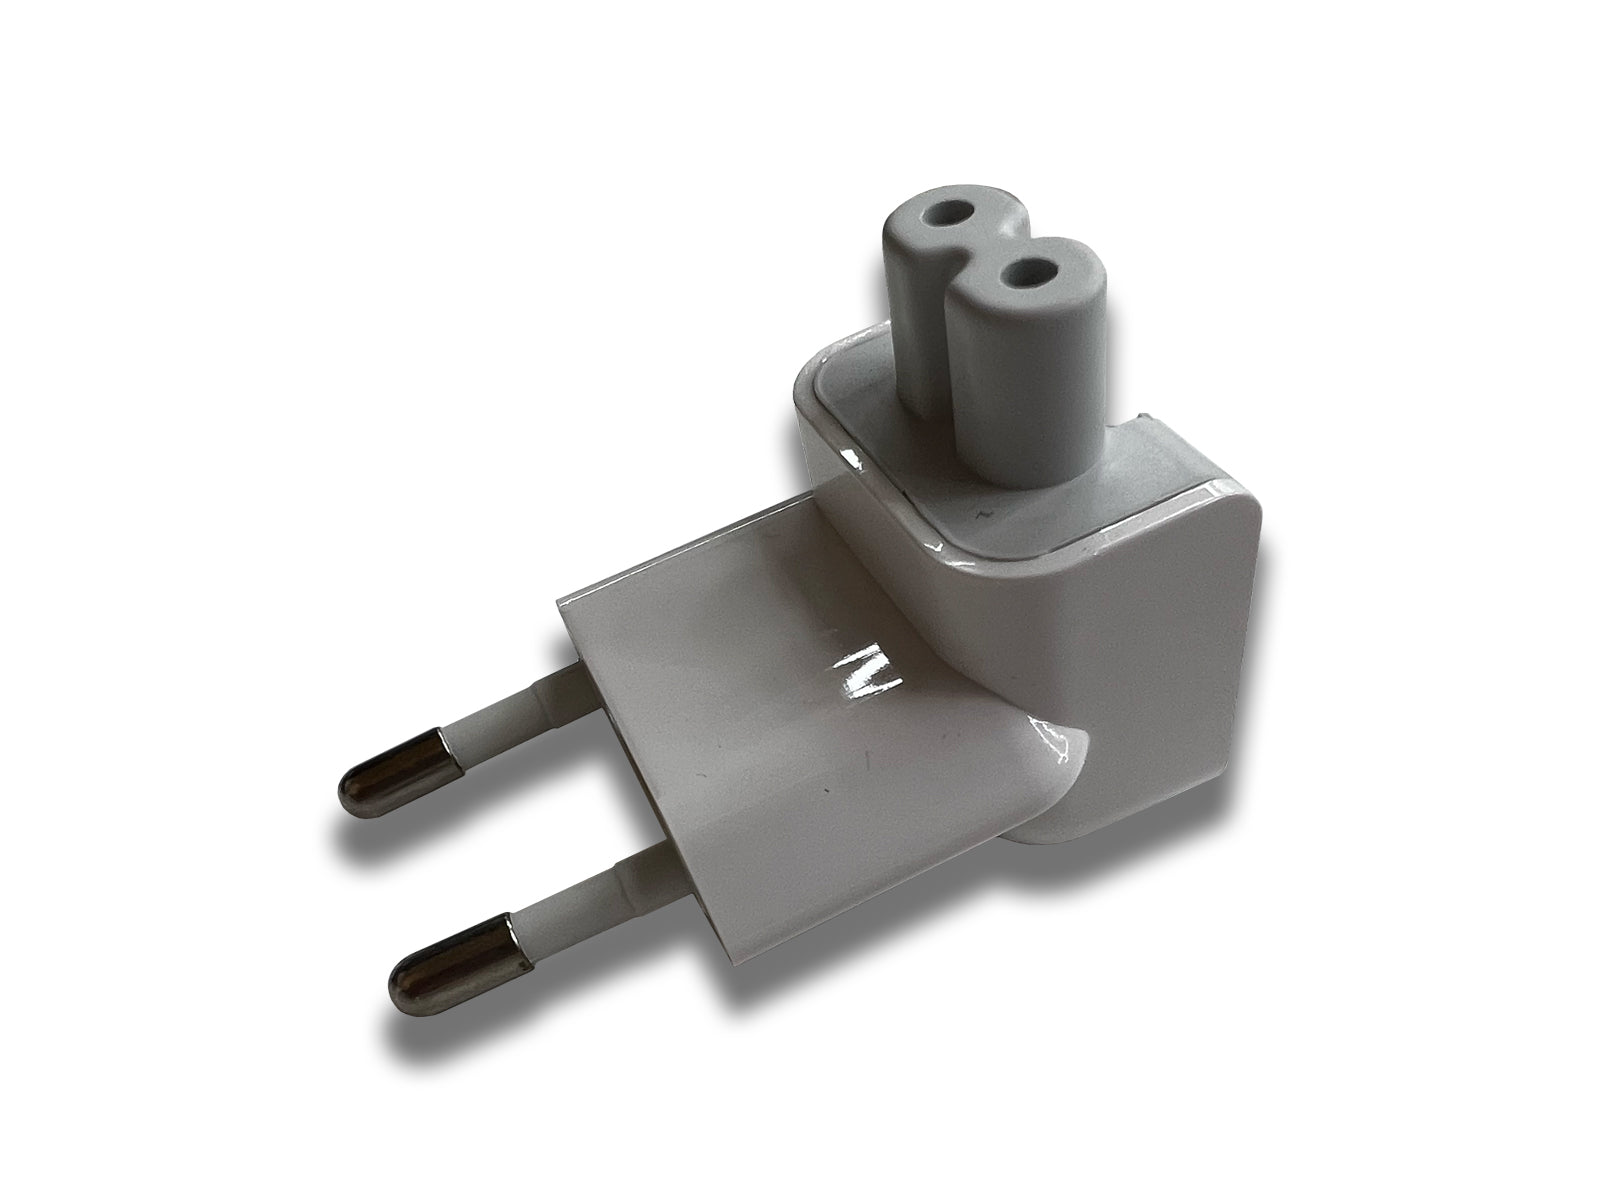 Picture-of-the-EU-plug-on-the-white-background